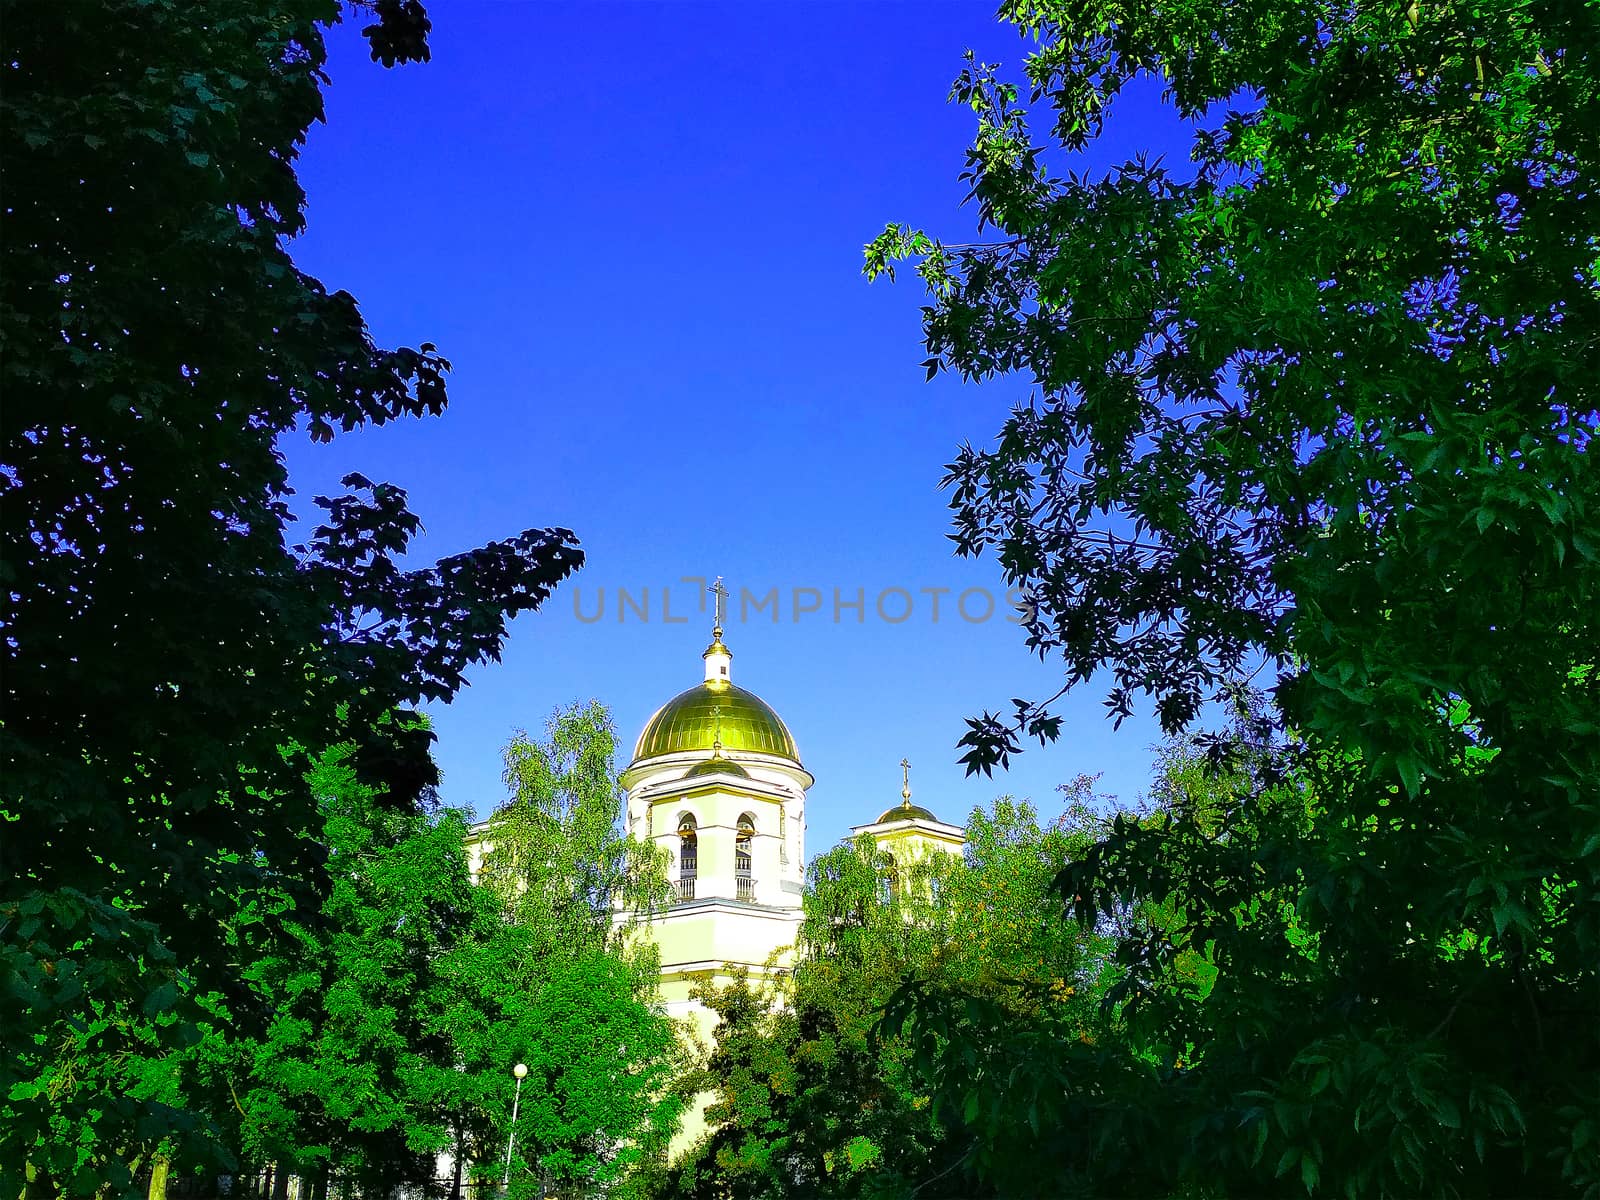 The ancient dome of the Church is located in the dense foliage between the trees.